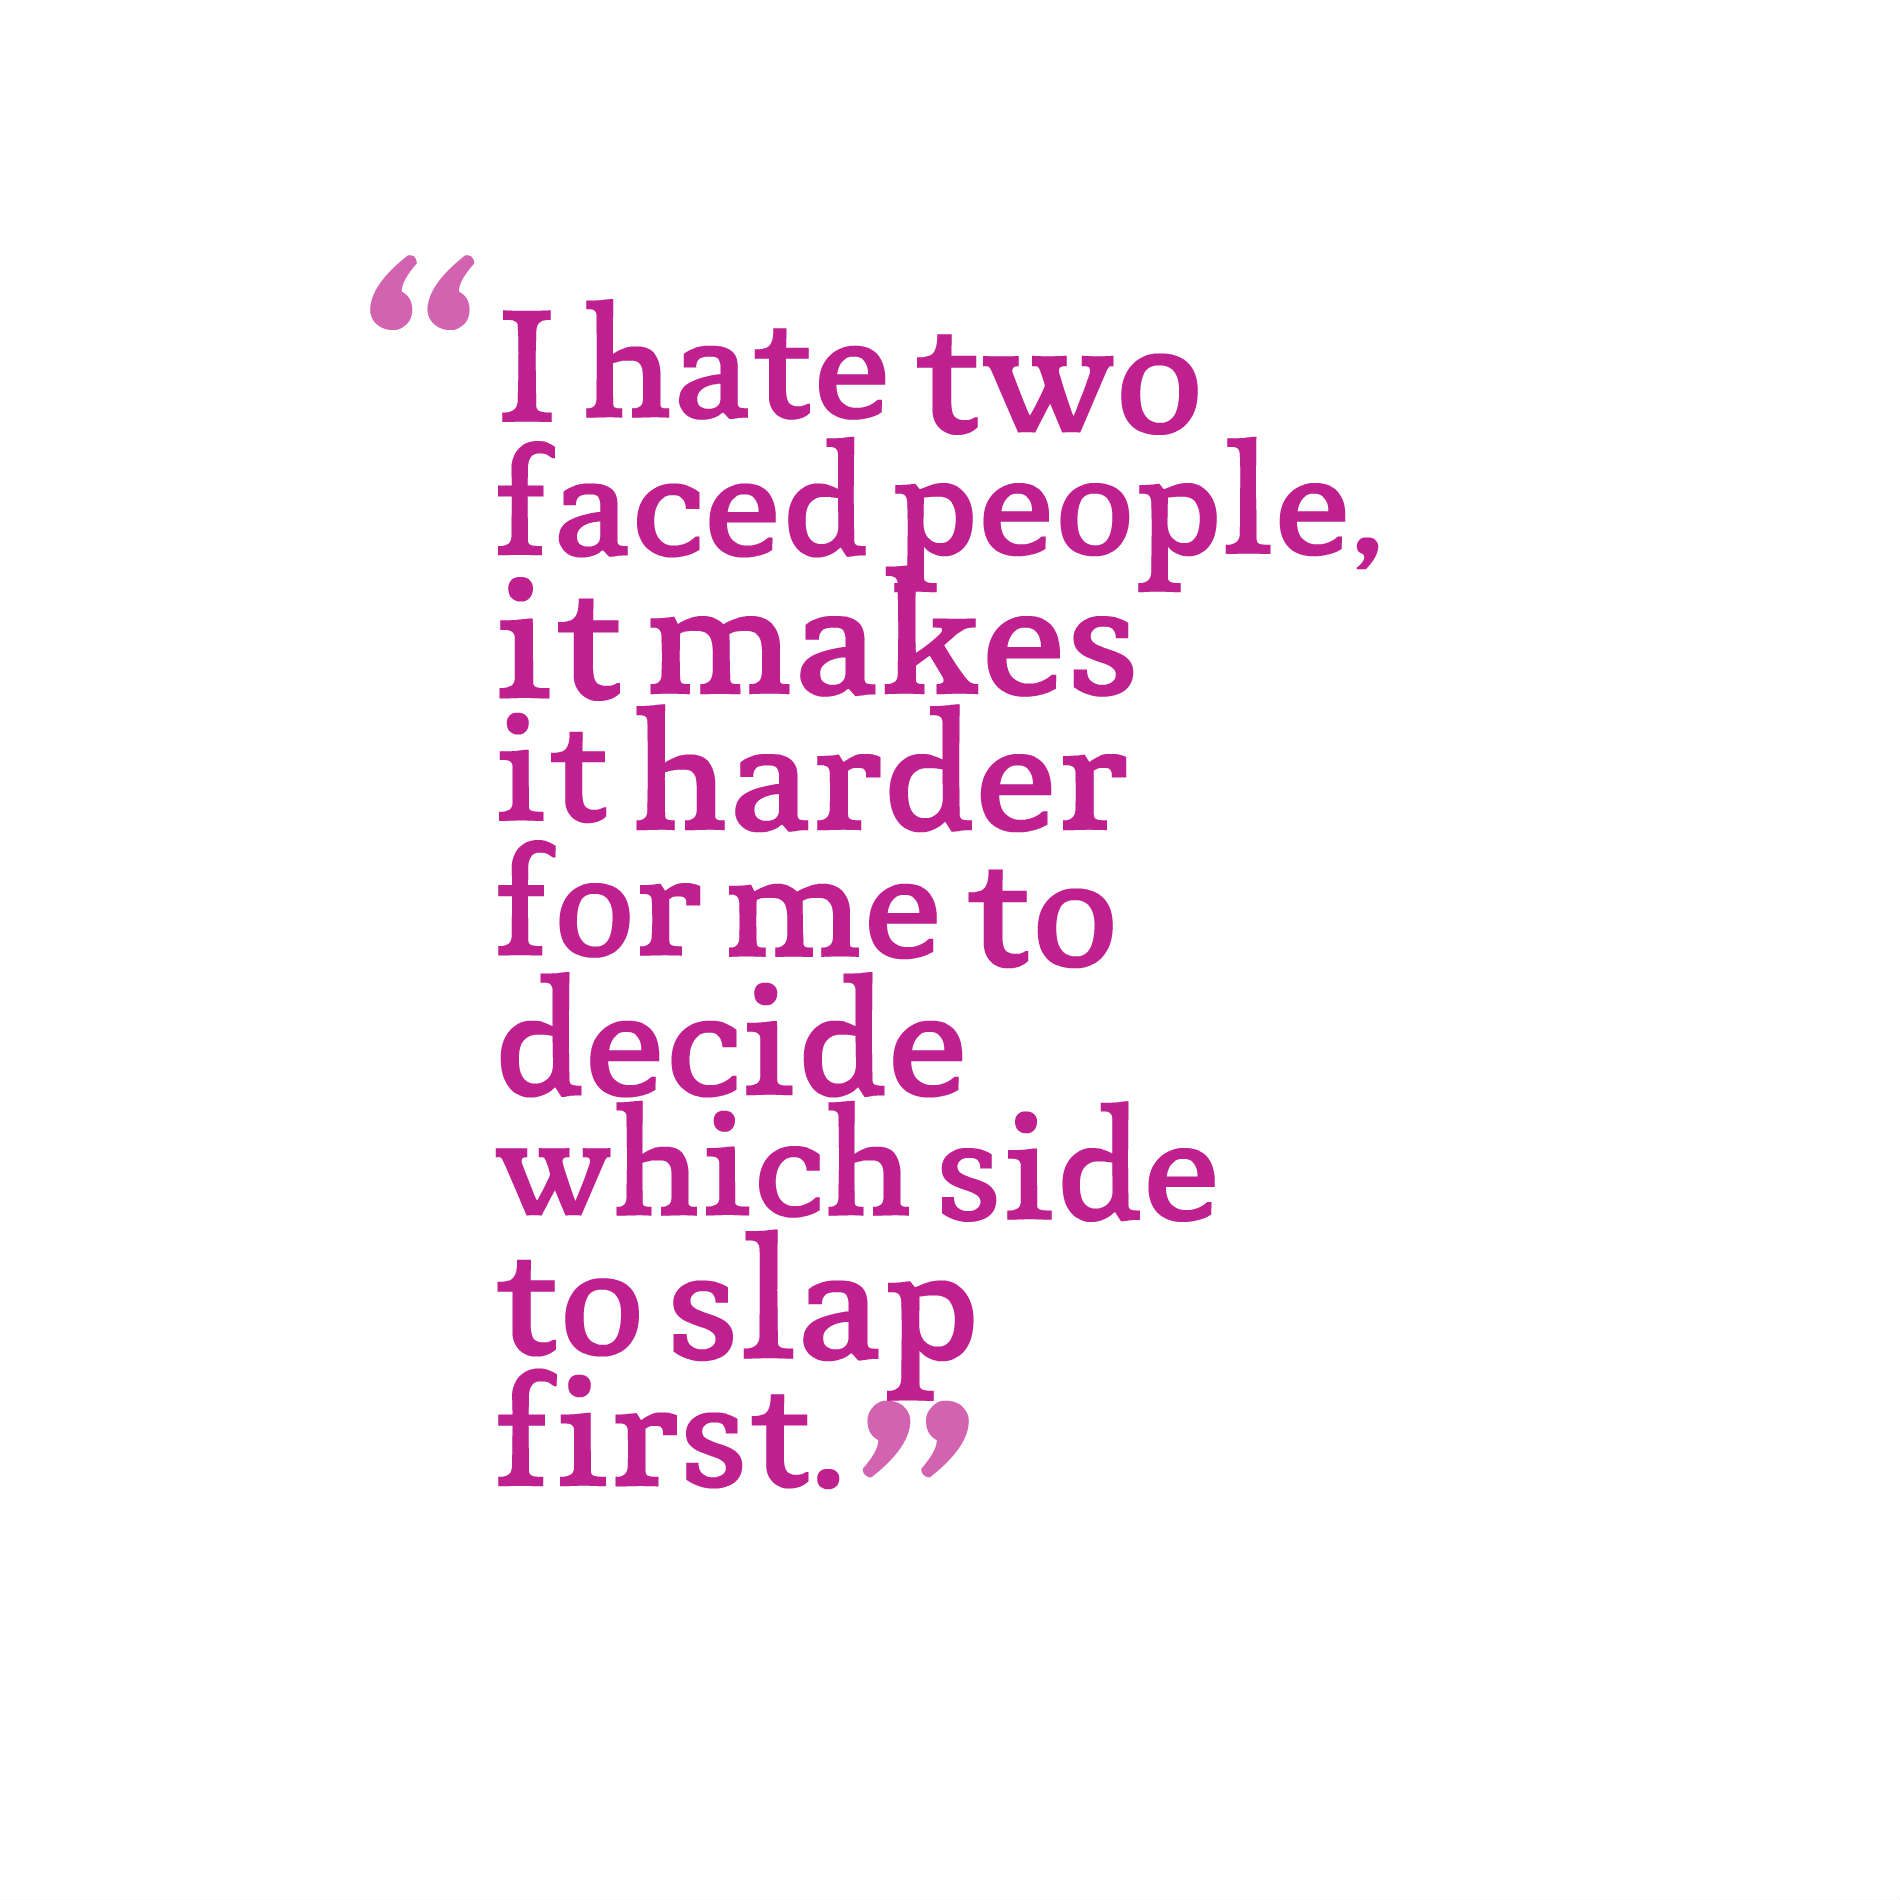 I hate two faced people, it makes it harder for me to decide which side to slap first.